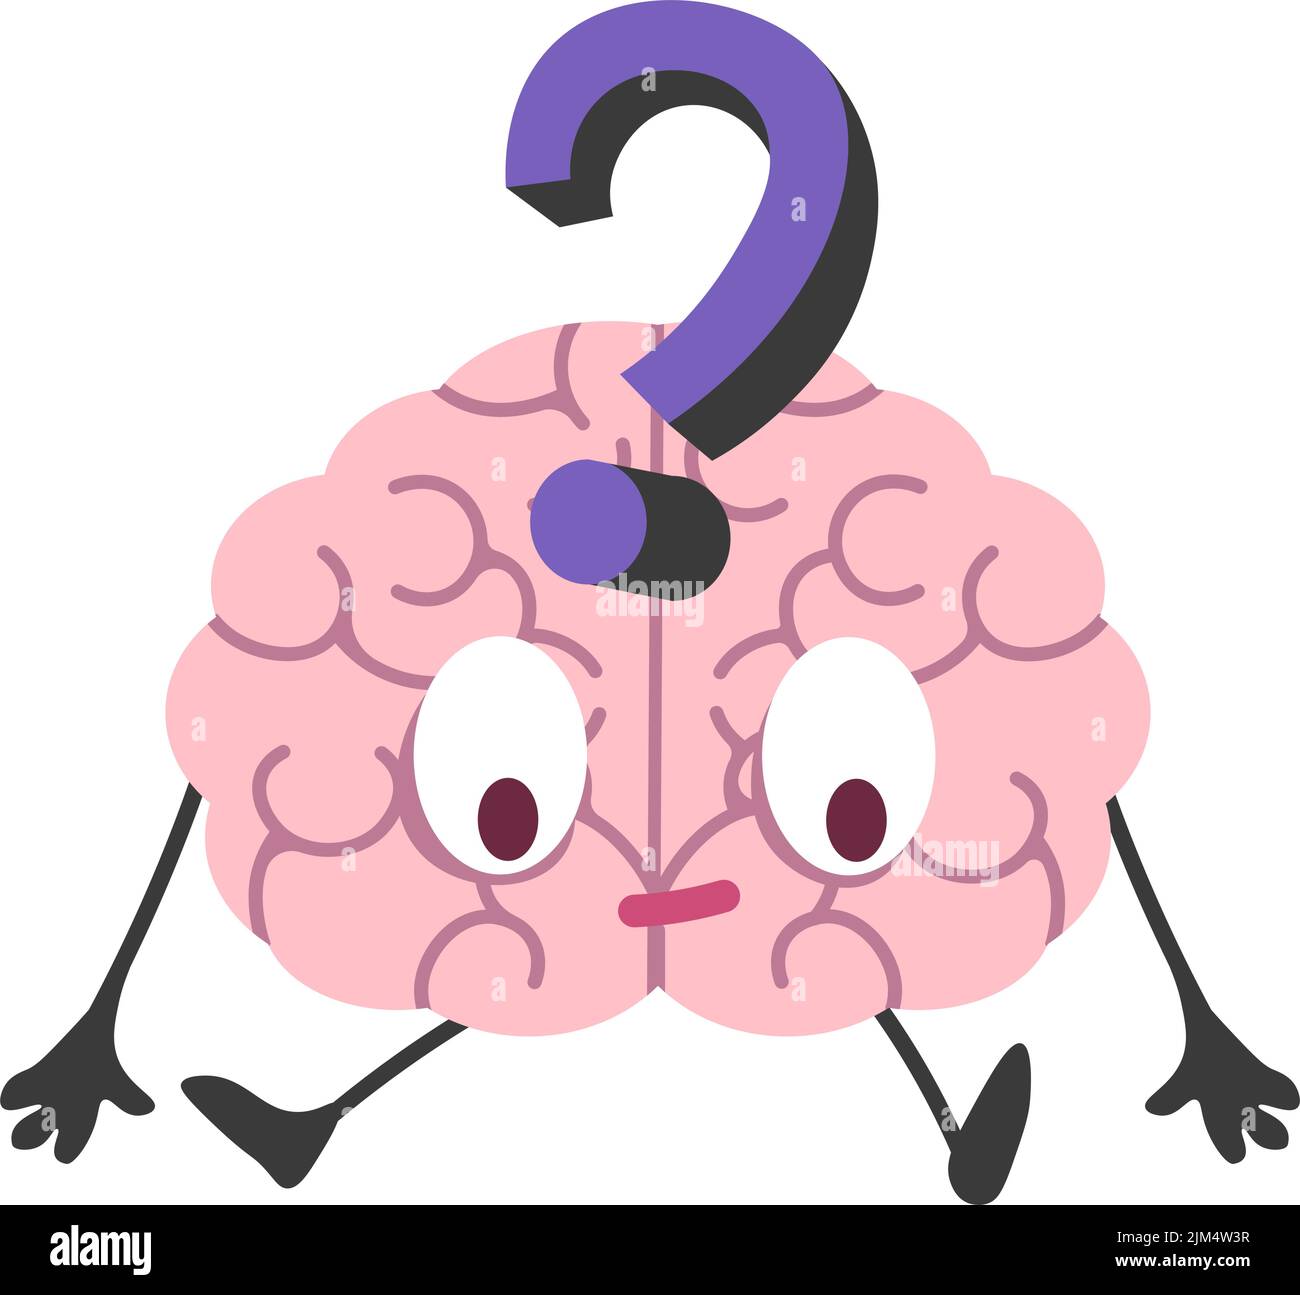 Puzzled brain, mind character with question mark Stock Vector Image ...